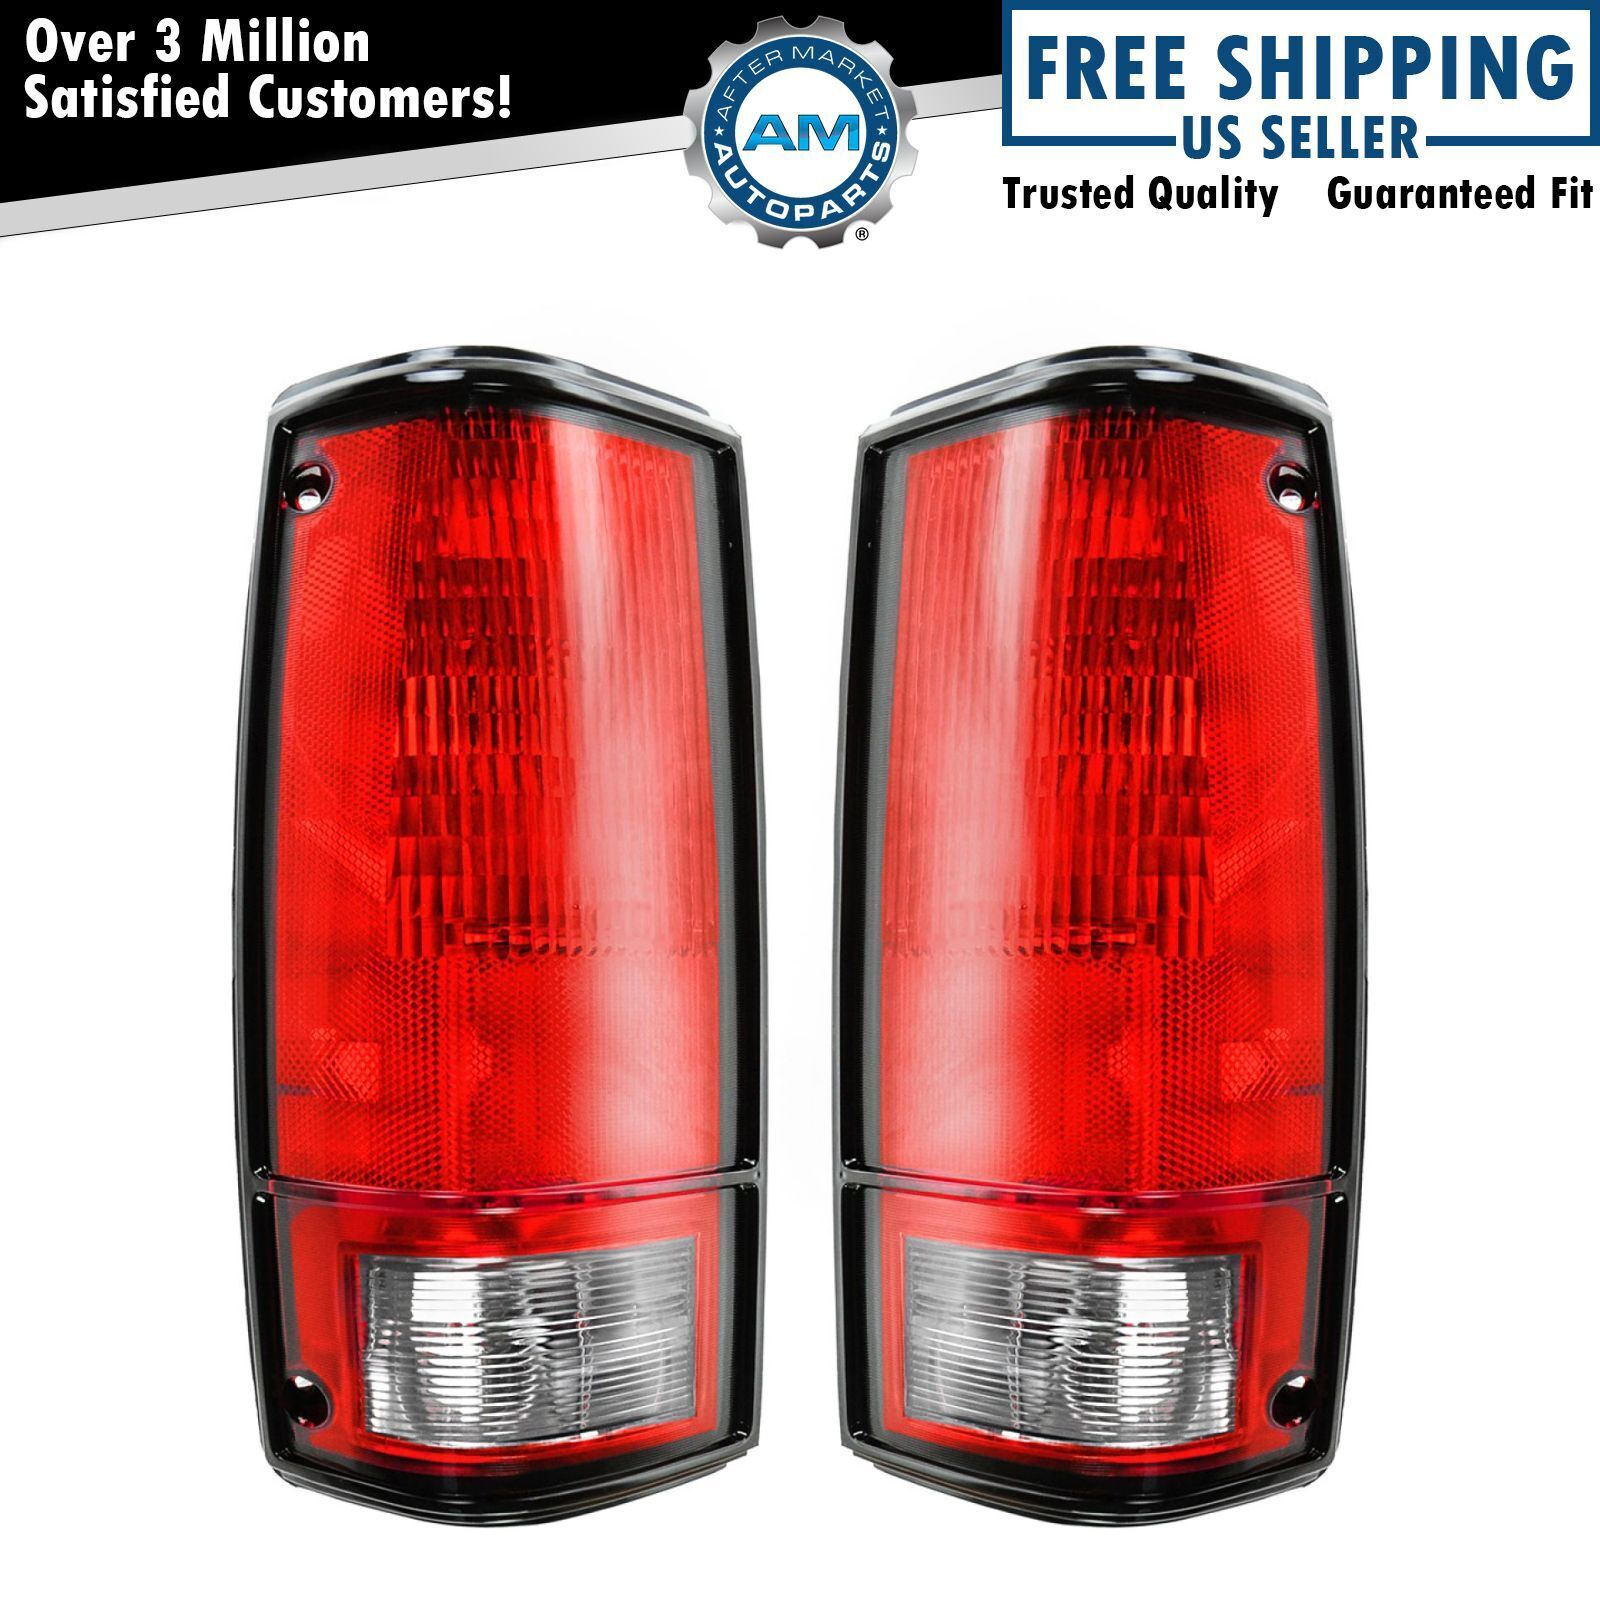 Tail Lights Taillamps Rear Pair Set For 82-93 Chevrolet S10 GMC S15 Pickup Truck